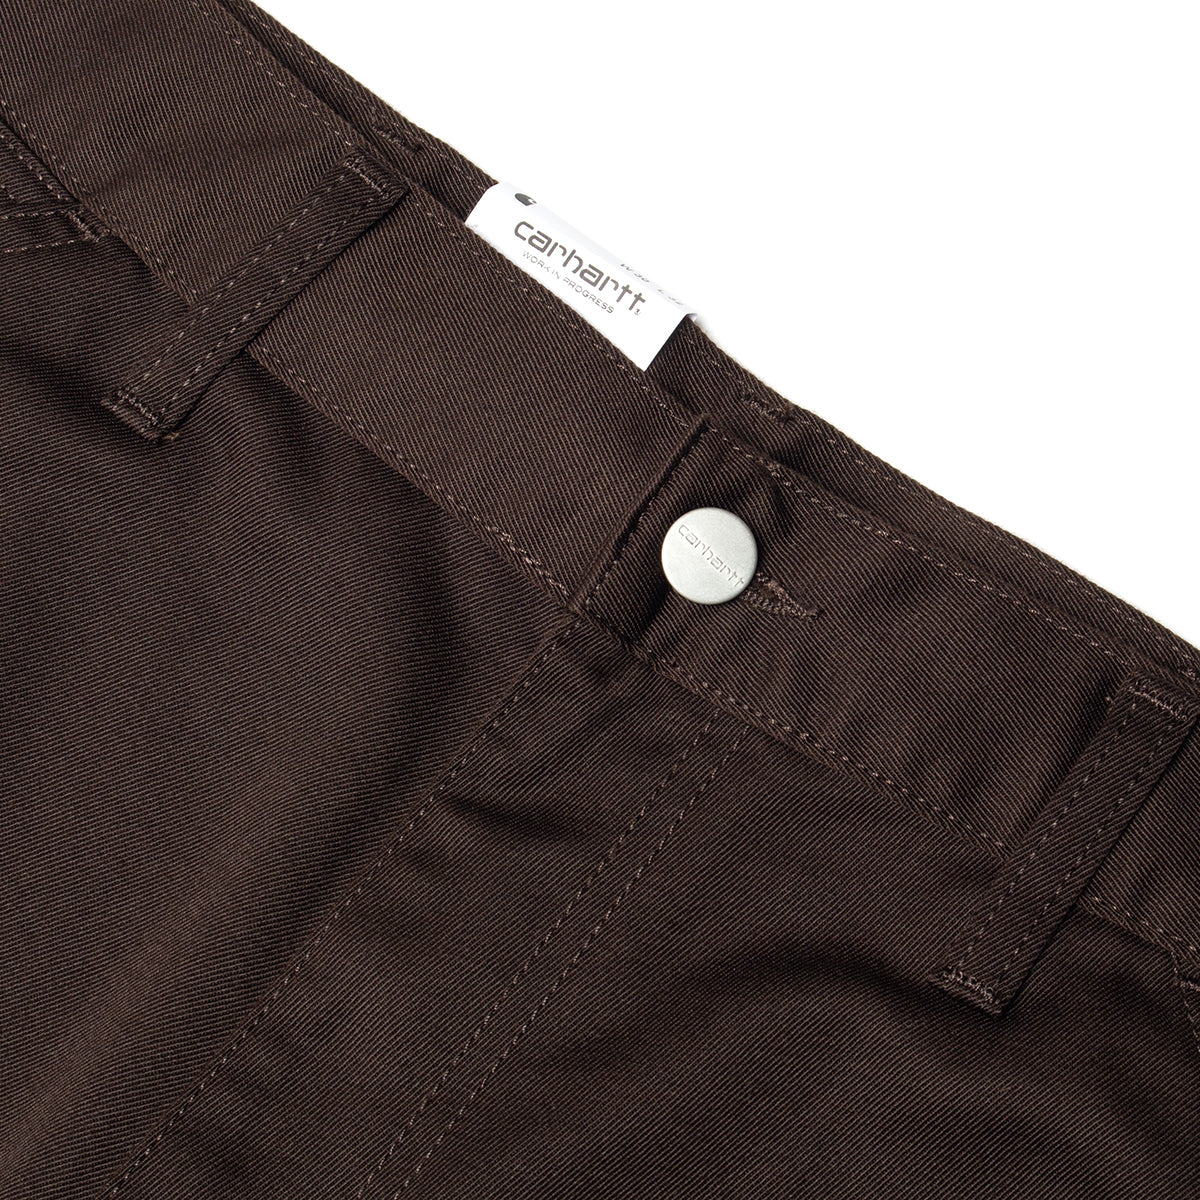 Carhartt WIP | Simple Pant Style # I020075-47 Color : Tobacco